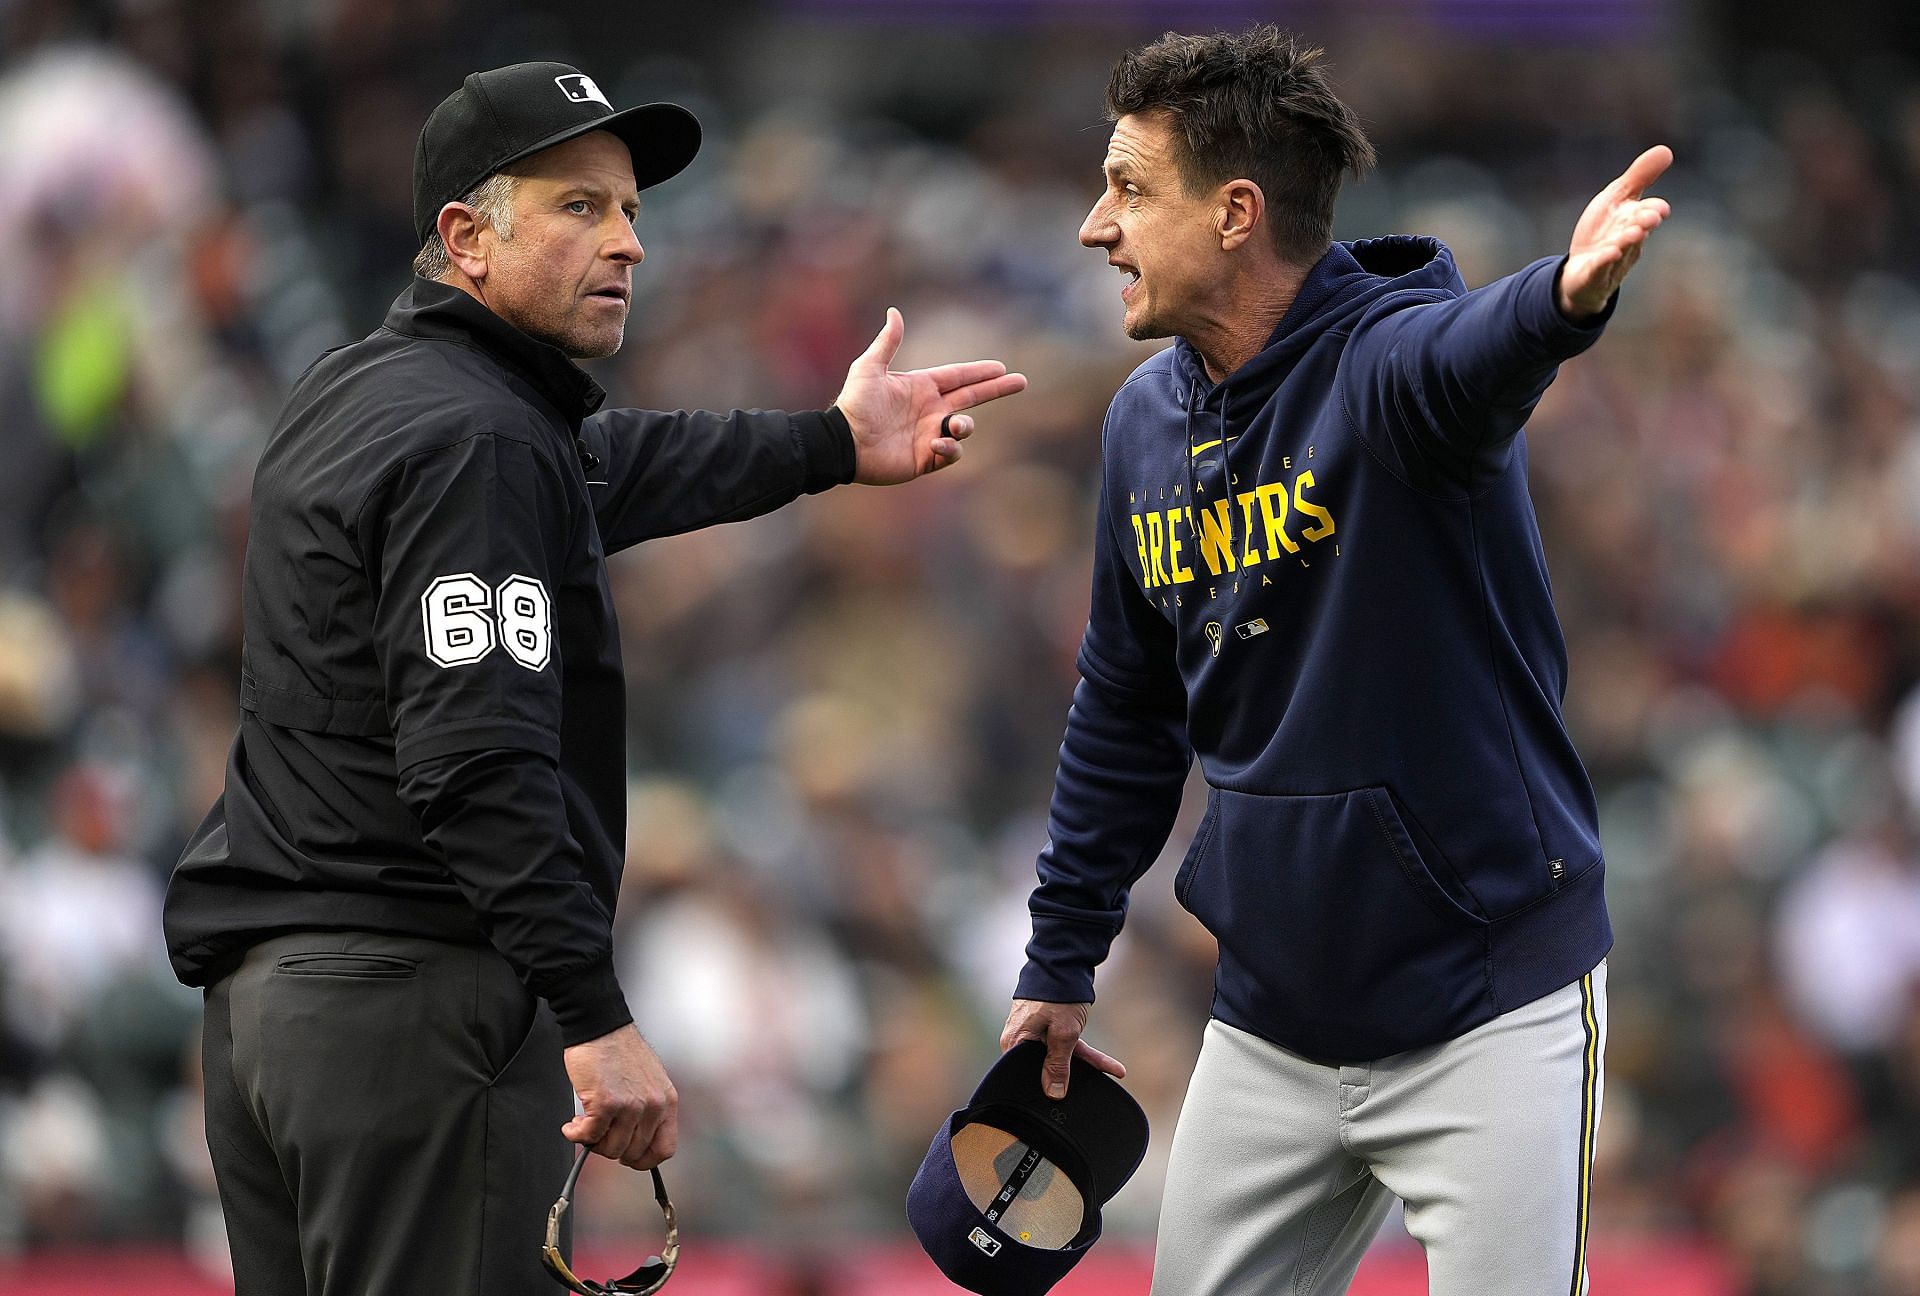 Brewers manager Craig Counsell: National age limit to bring glove